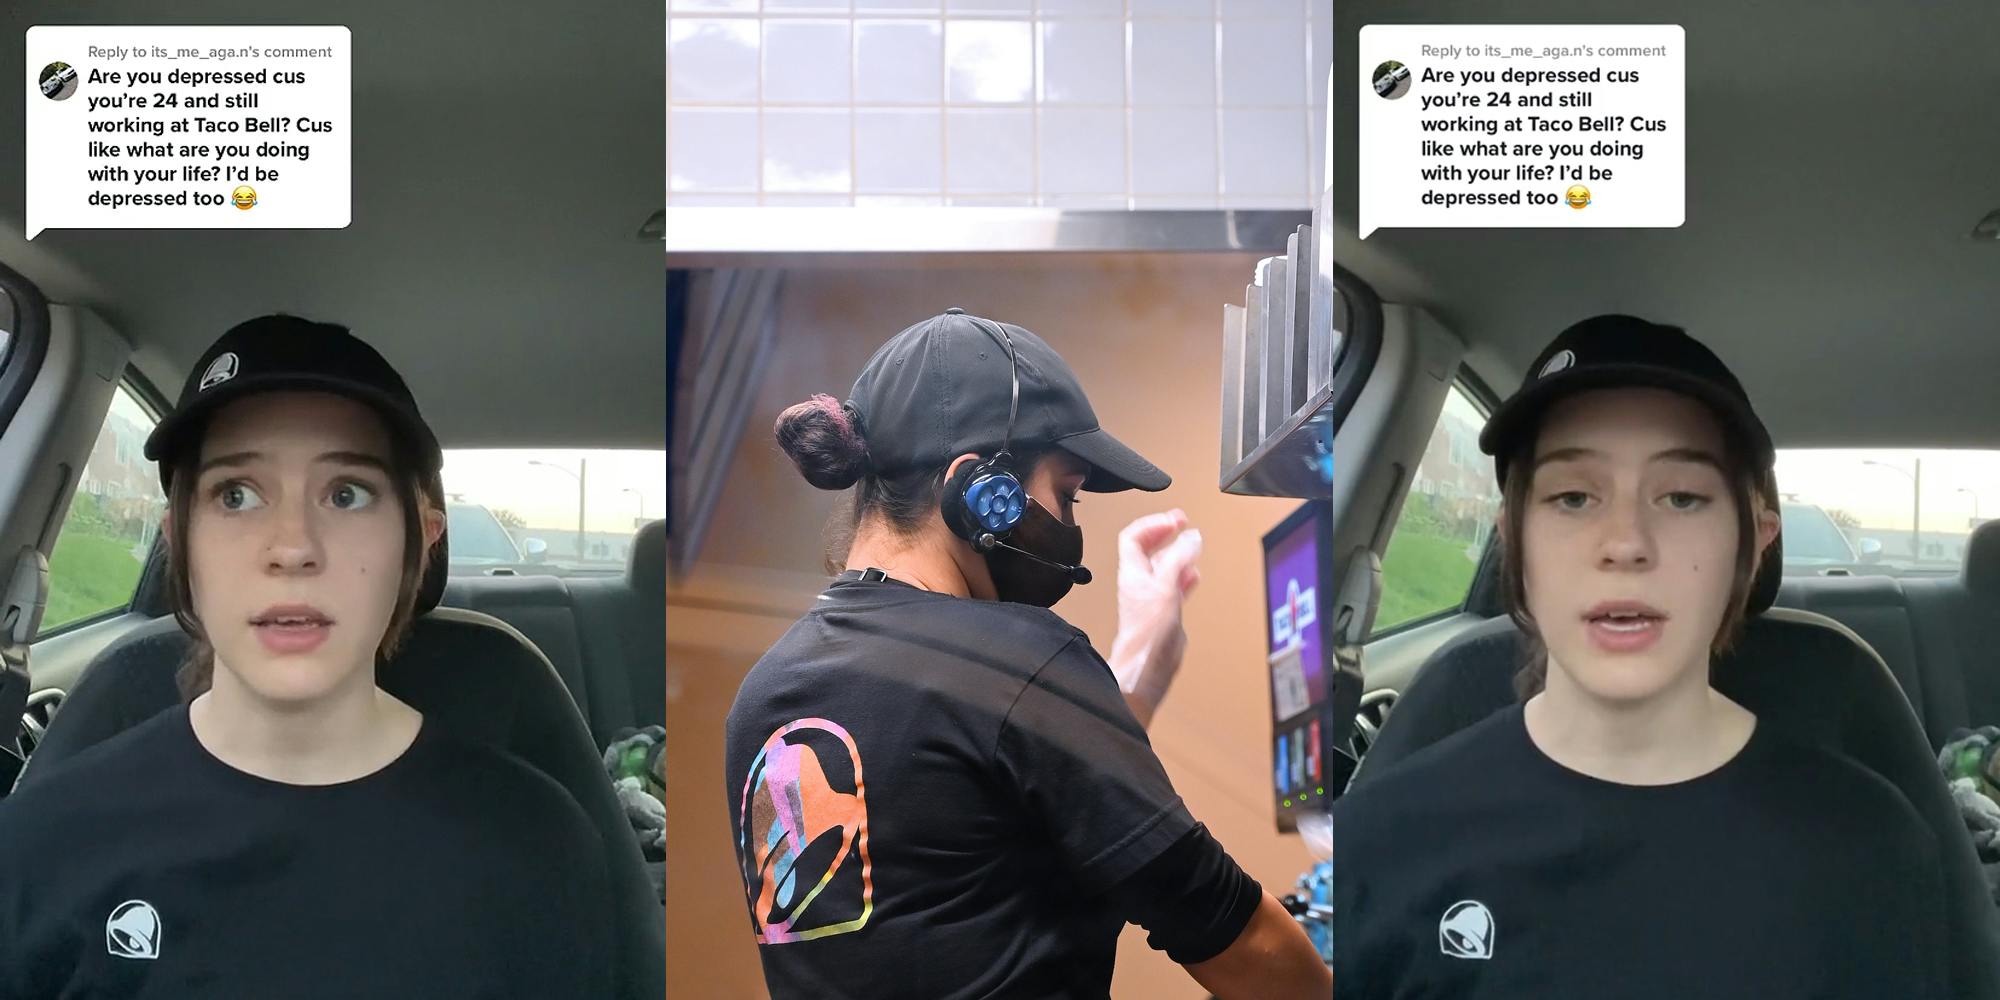 ‘I enjoy my job. I like it’: 24-year-old Taco Bell worker called out for being too old, sparking debate